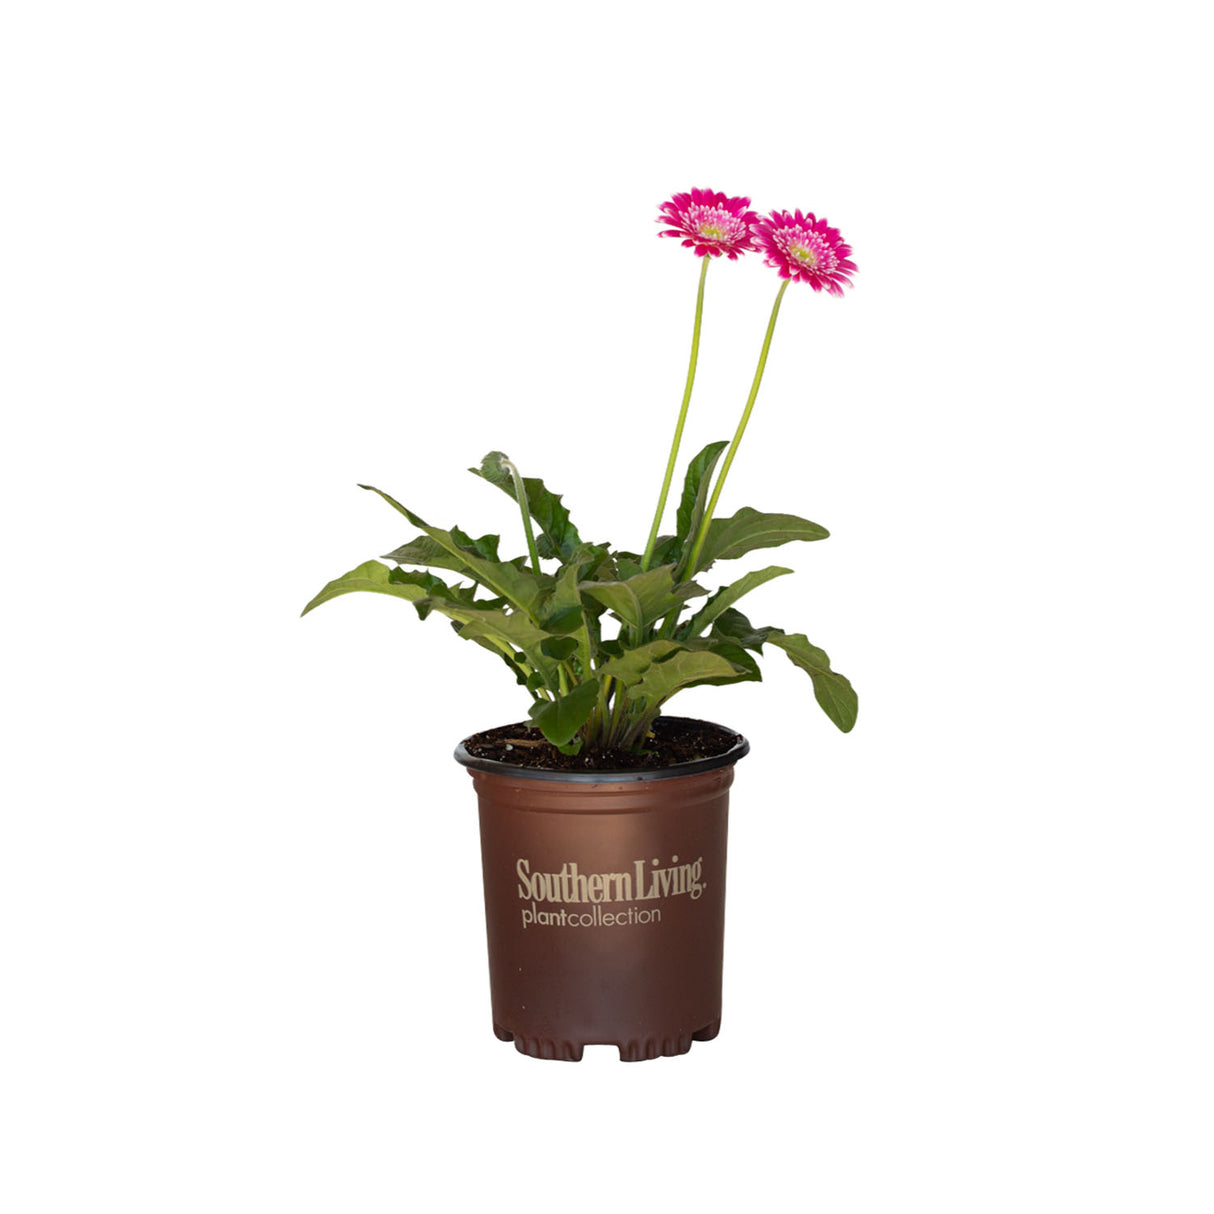 frosted pink gerbera daisy for sale